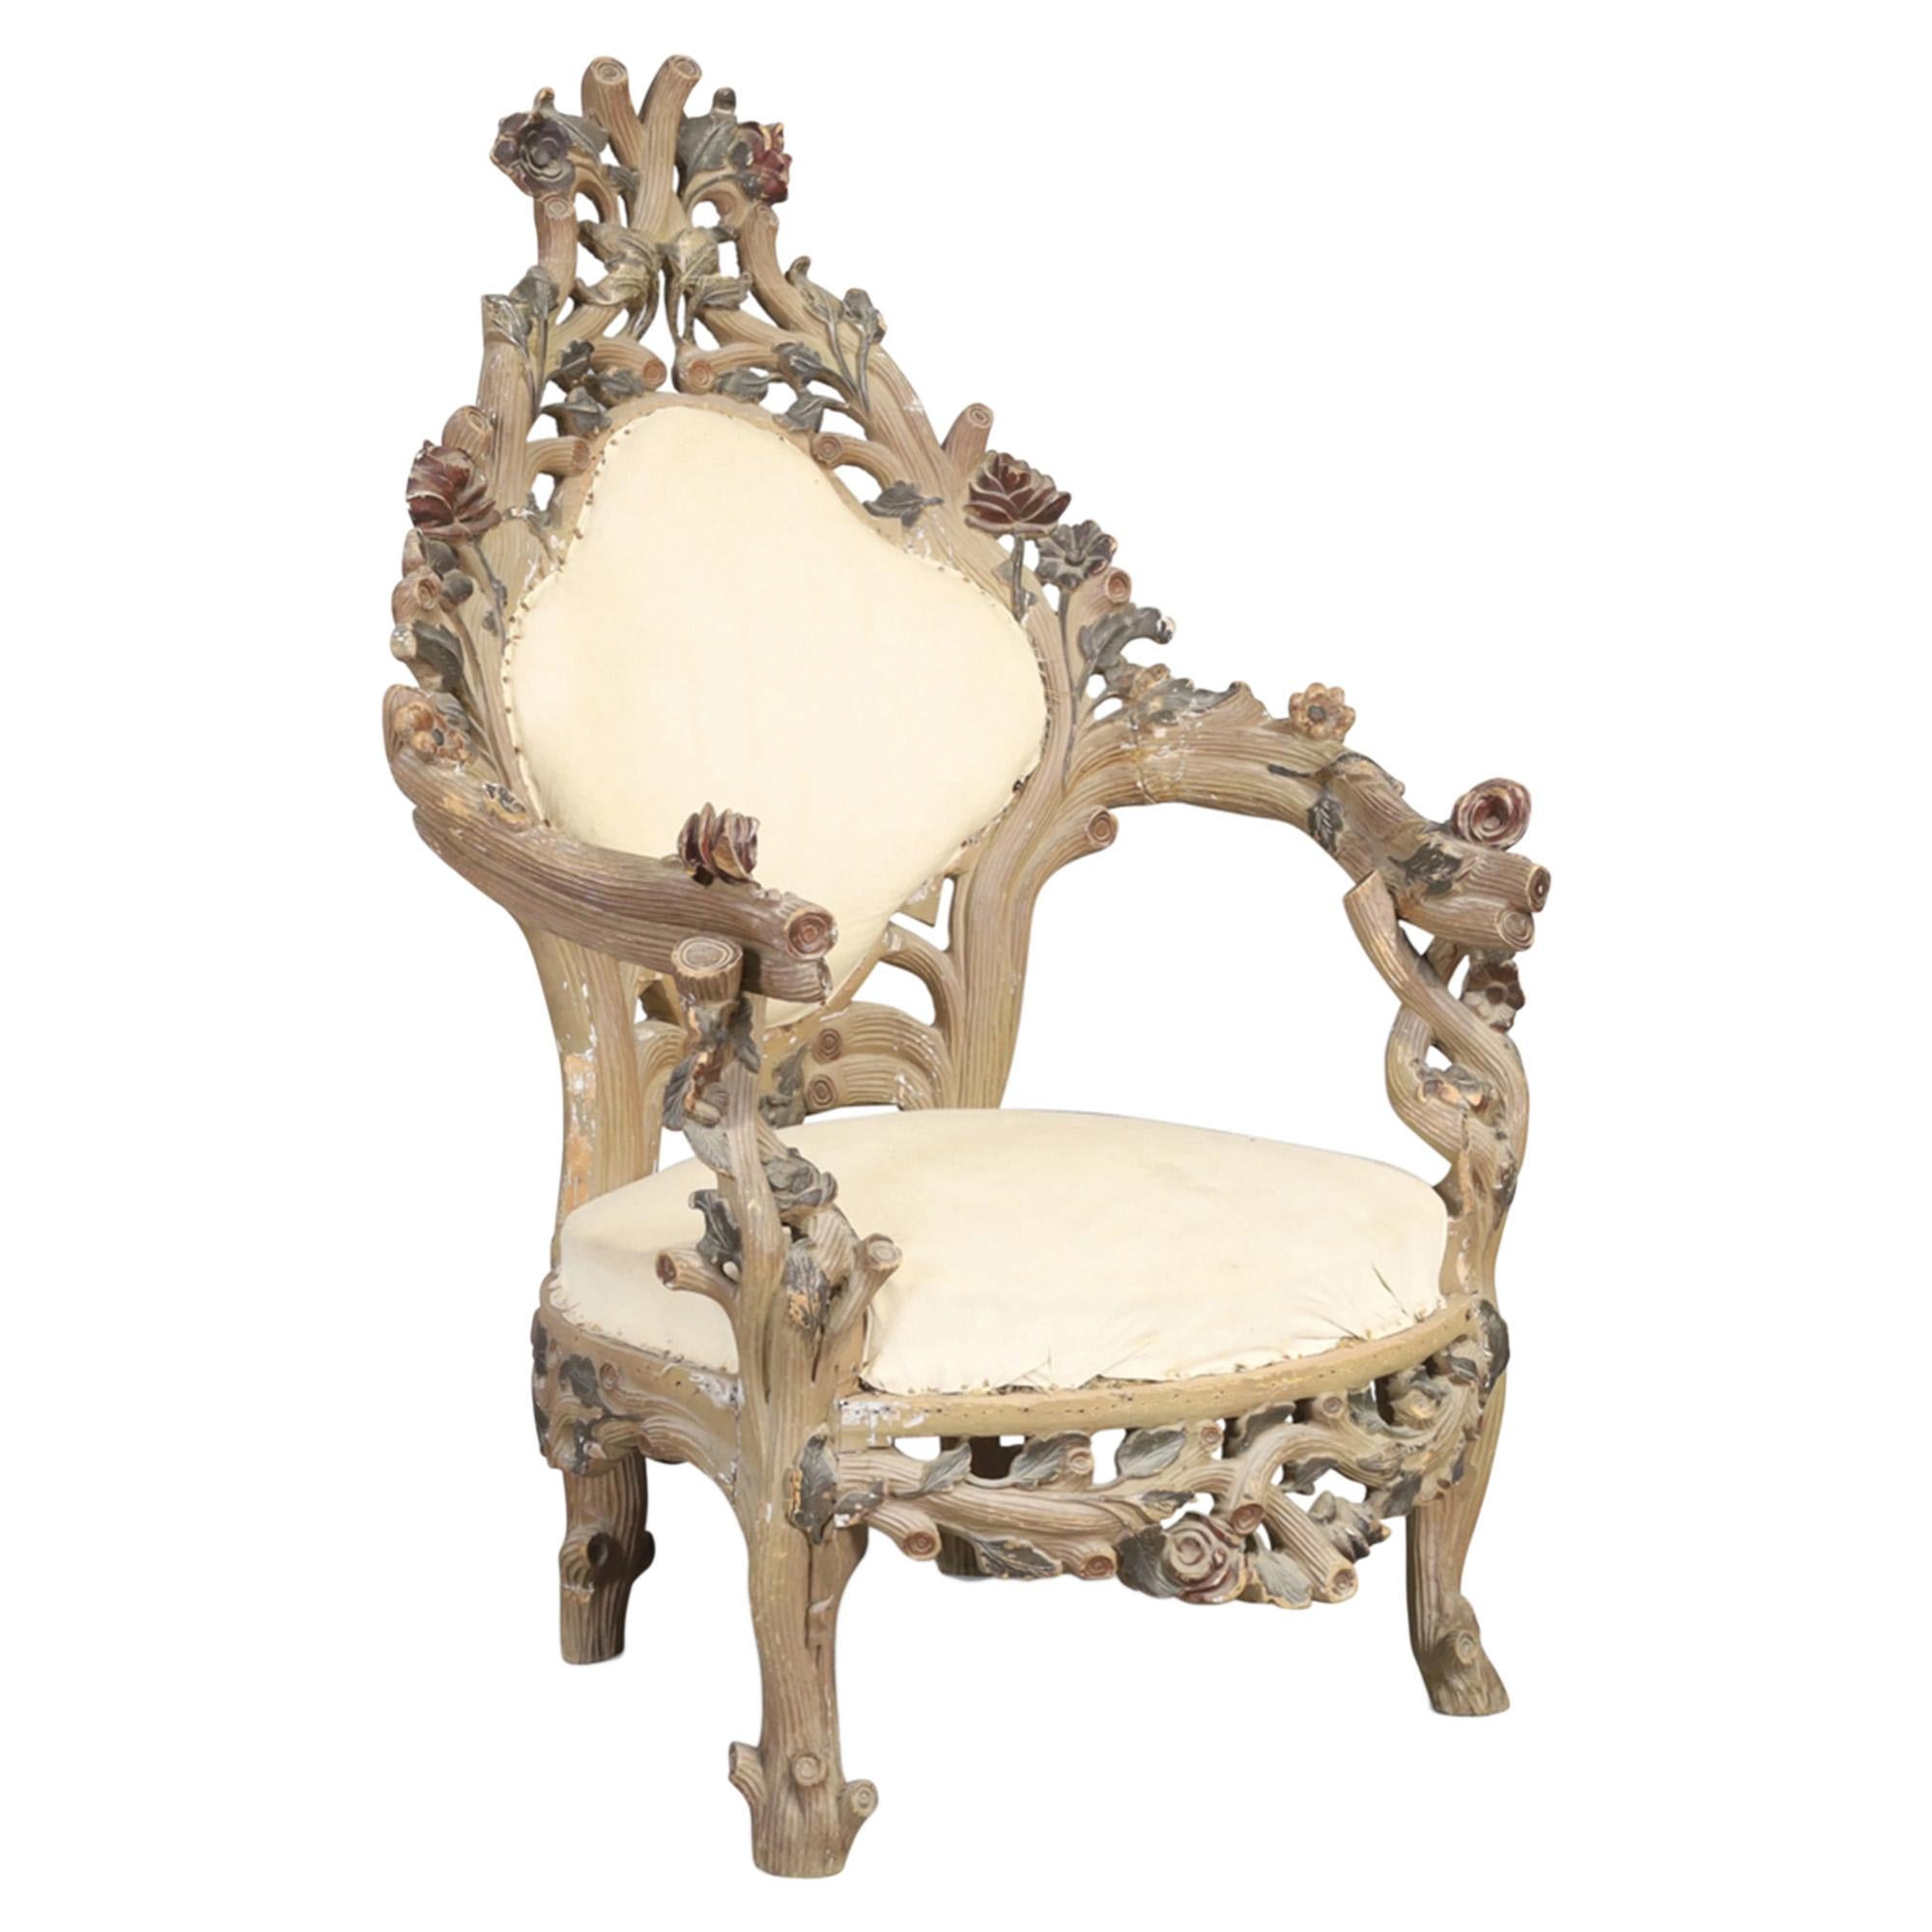 Highly decorative - this pair of naturalistic Italian carved wood armchairs certainly make a statement. 

Made from hardwood, please take a look at all our pictures to see the intricate detail and craftsmanship of the chair frames. Entwined tree